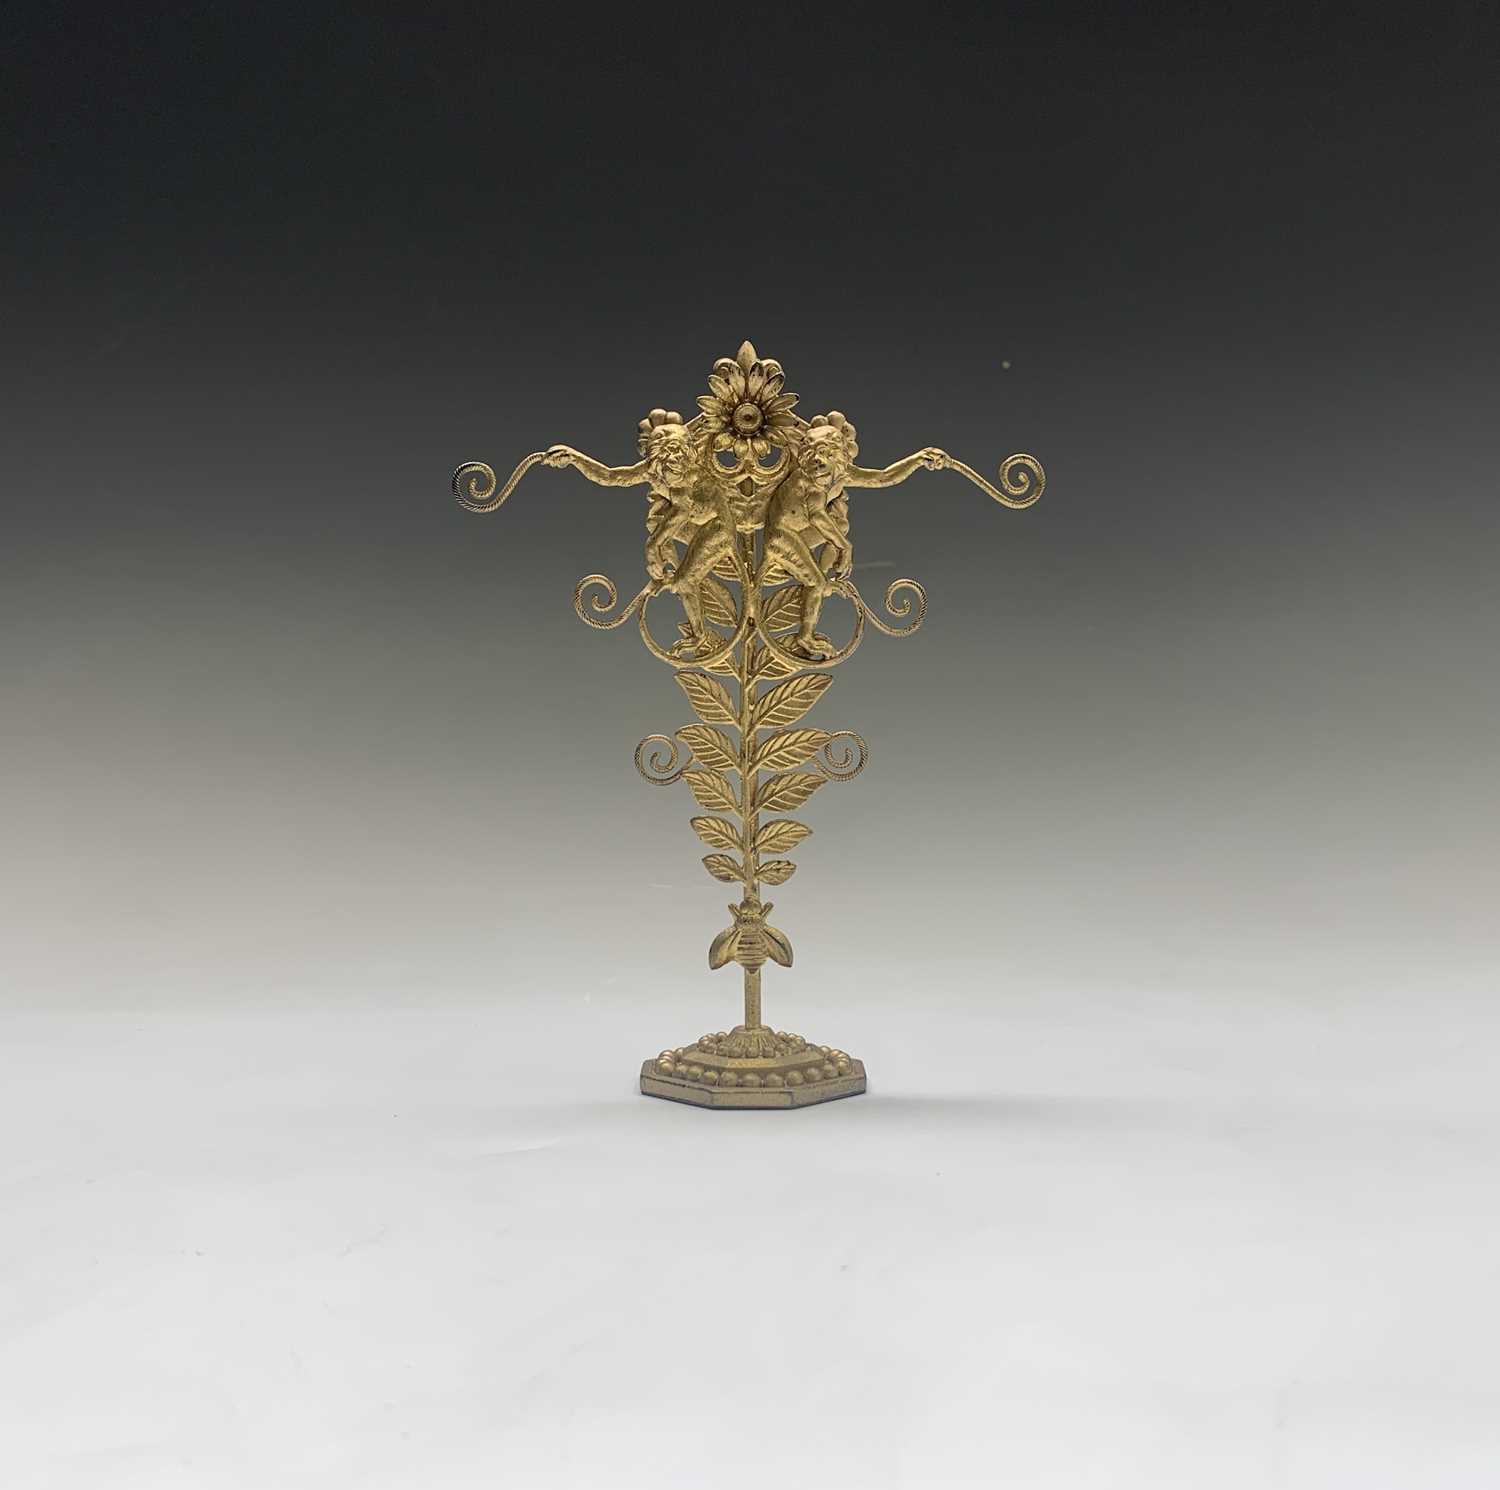 A monkey cast earring stand by Askew London - Image 2 of 2